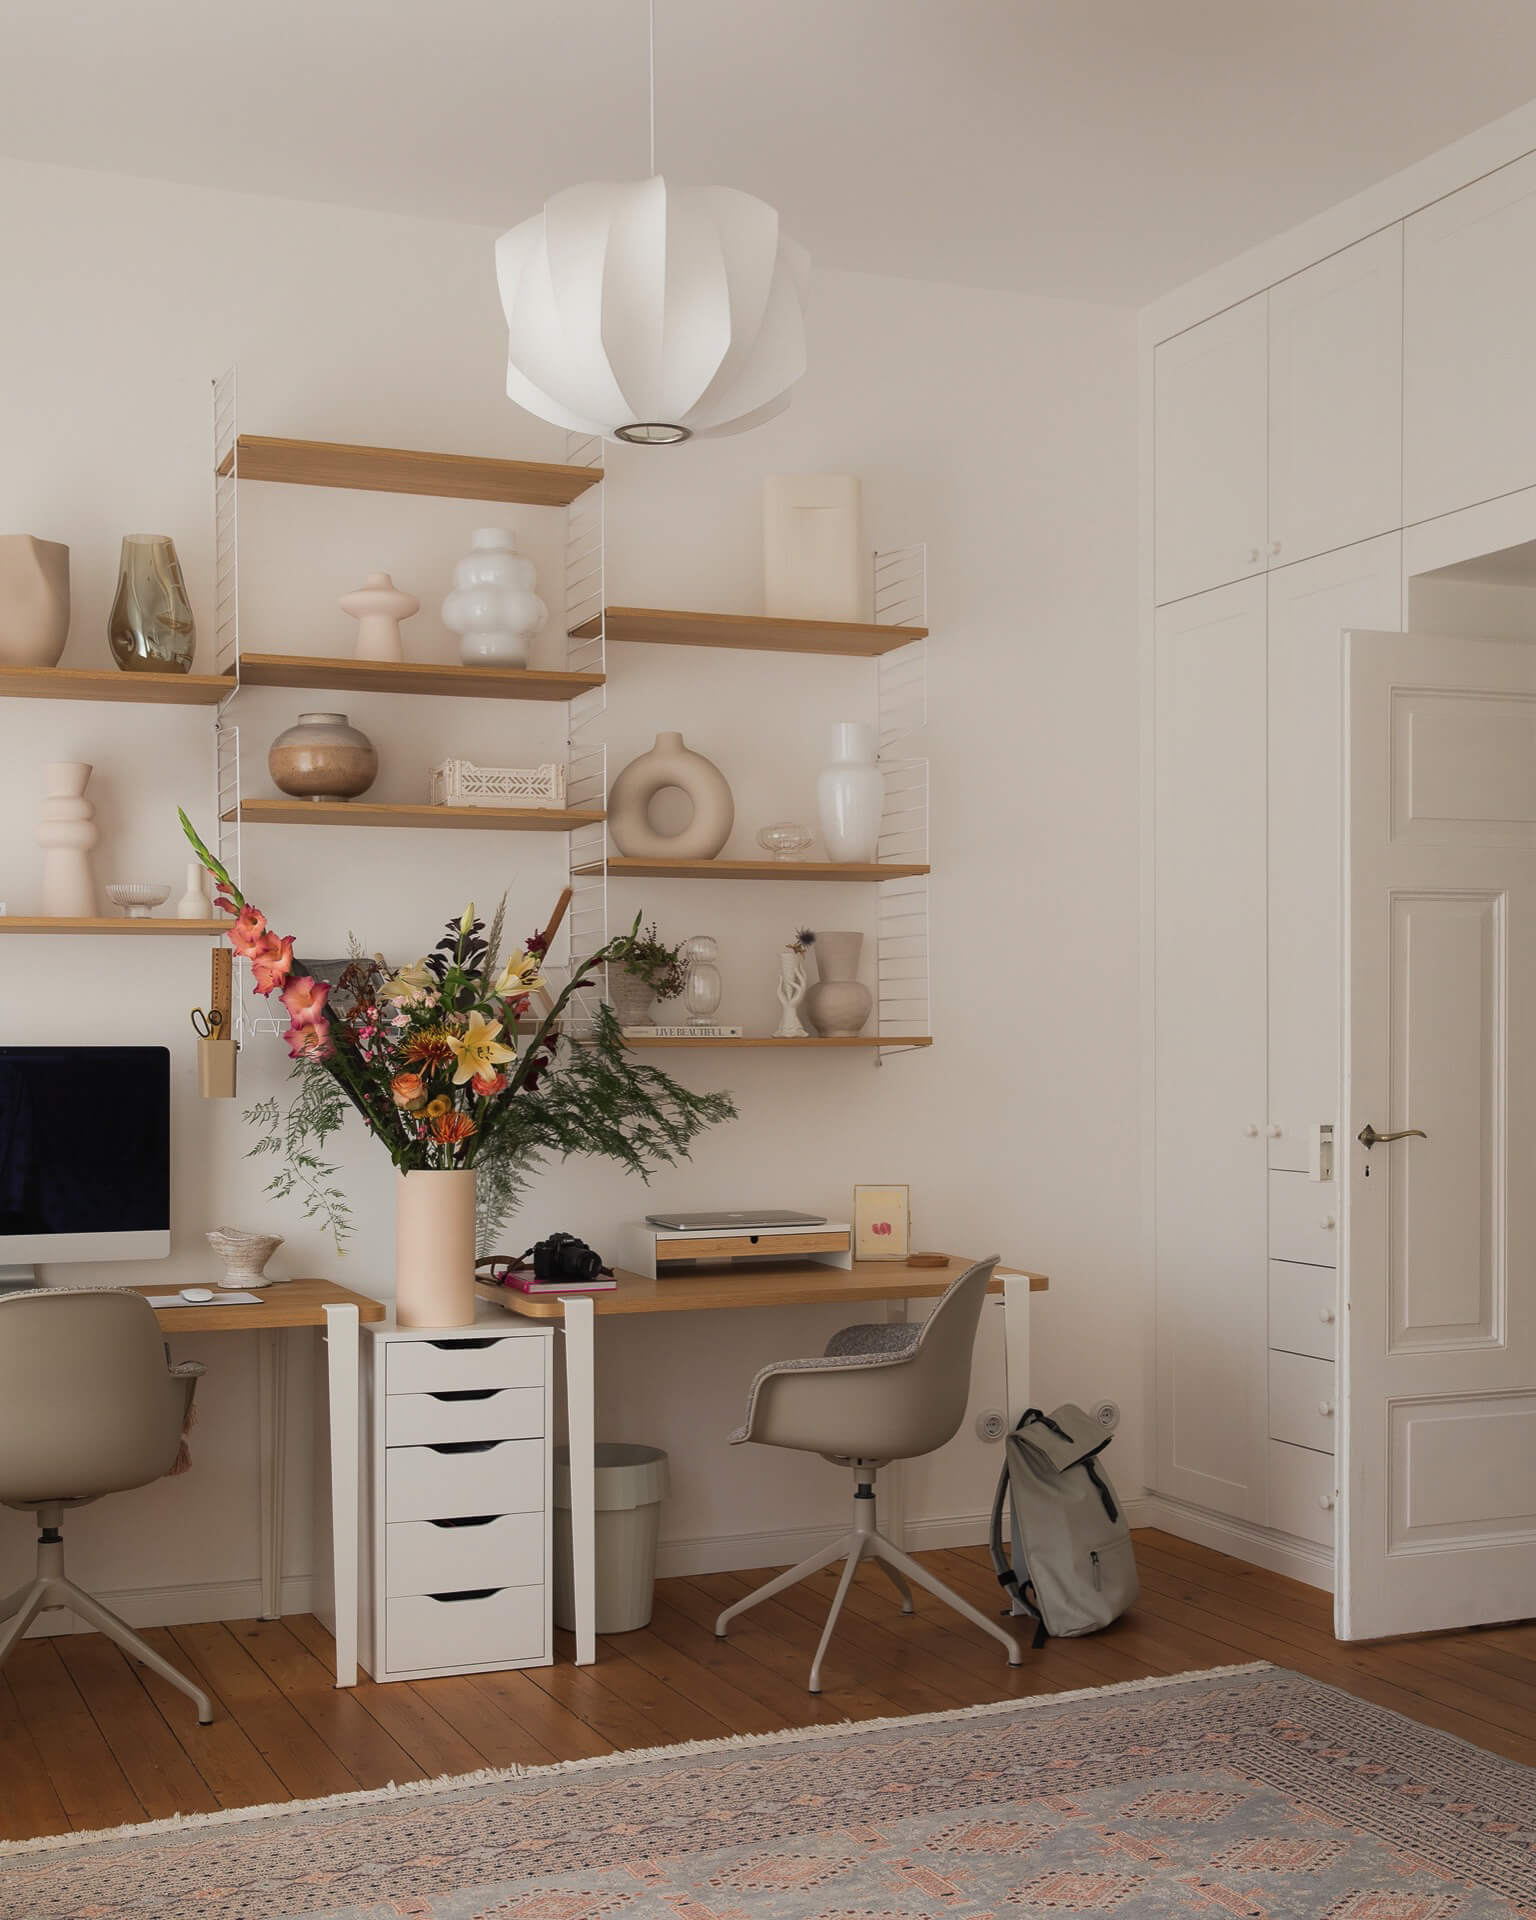 modern office space by Instagrammers Danilo and Paolo of @homeinheidelberg home tour